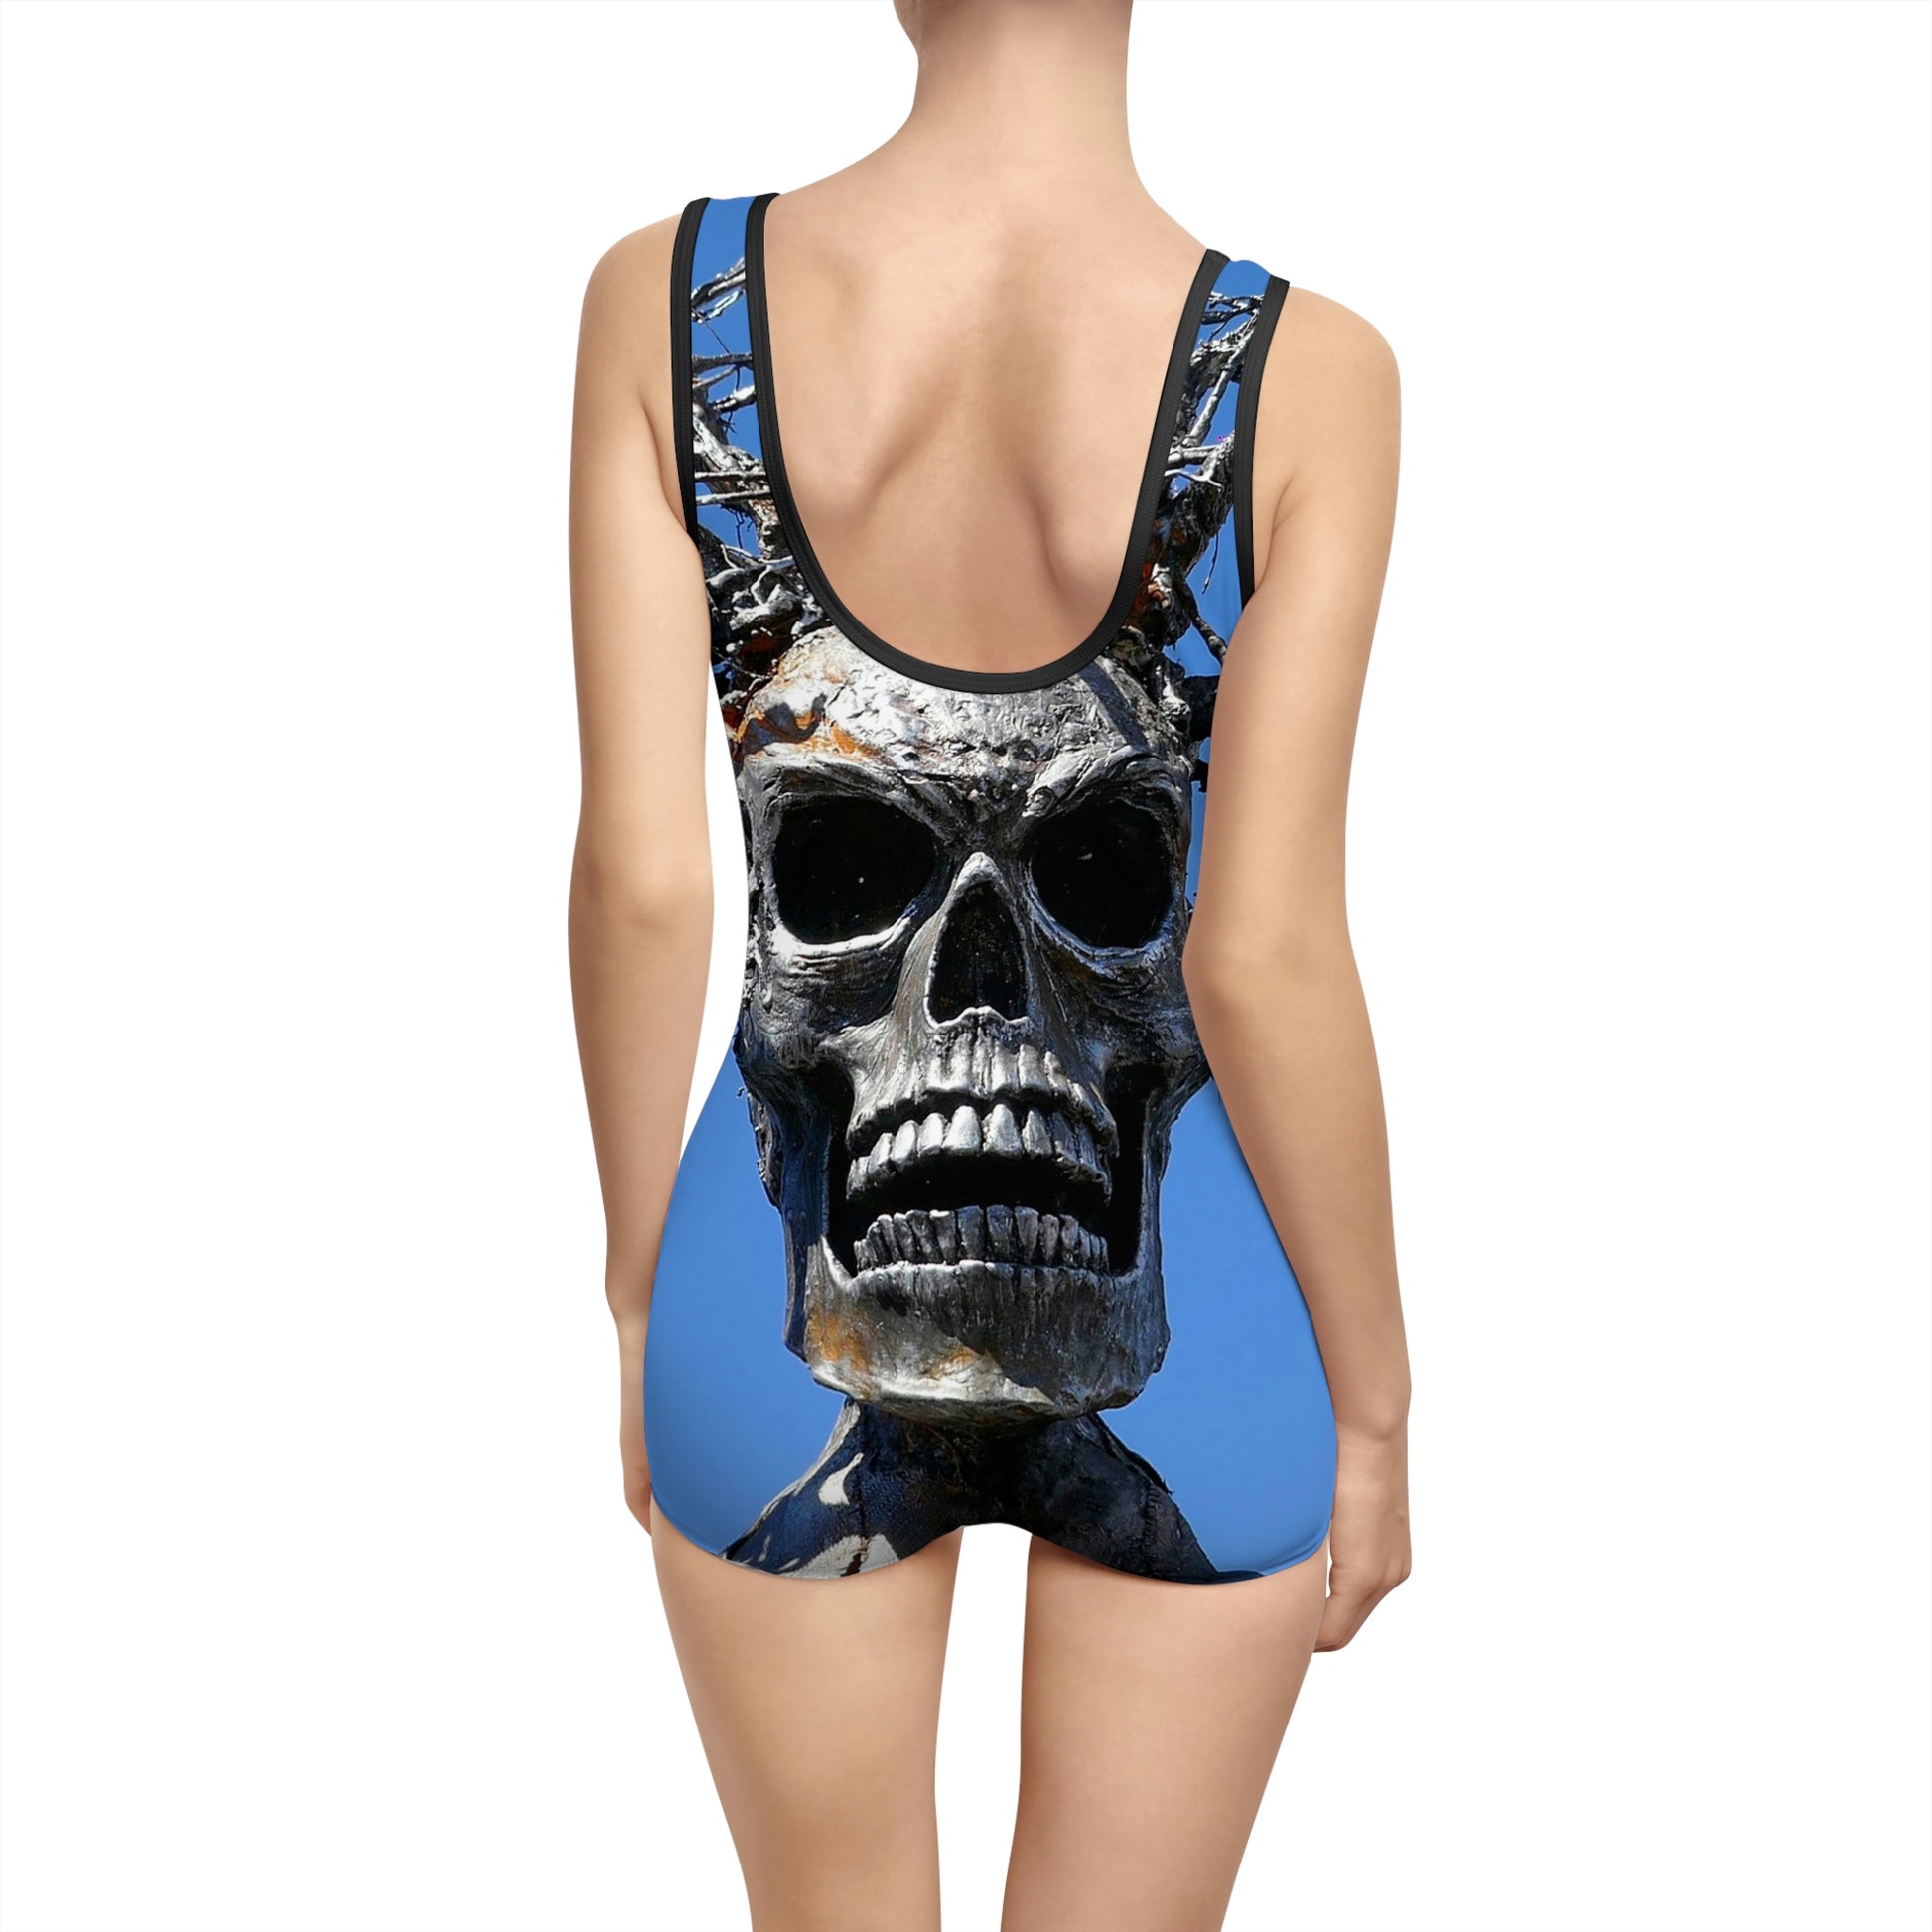 Skull Warrior Stare - Women's Vintage Swimsuit - Fry1Productions